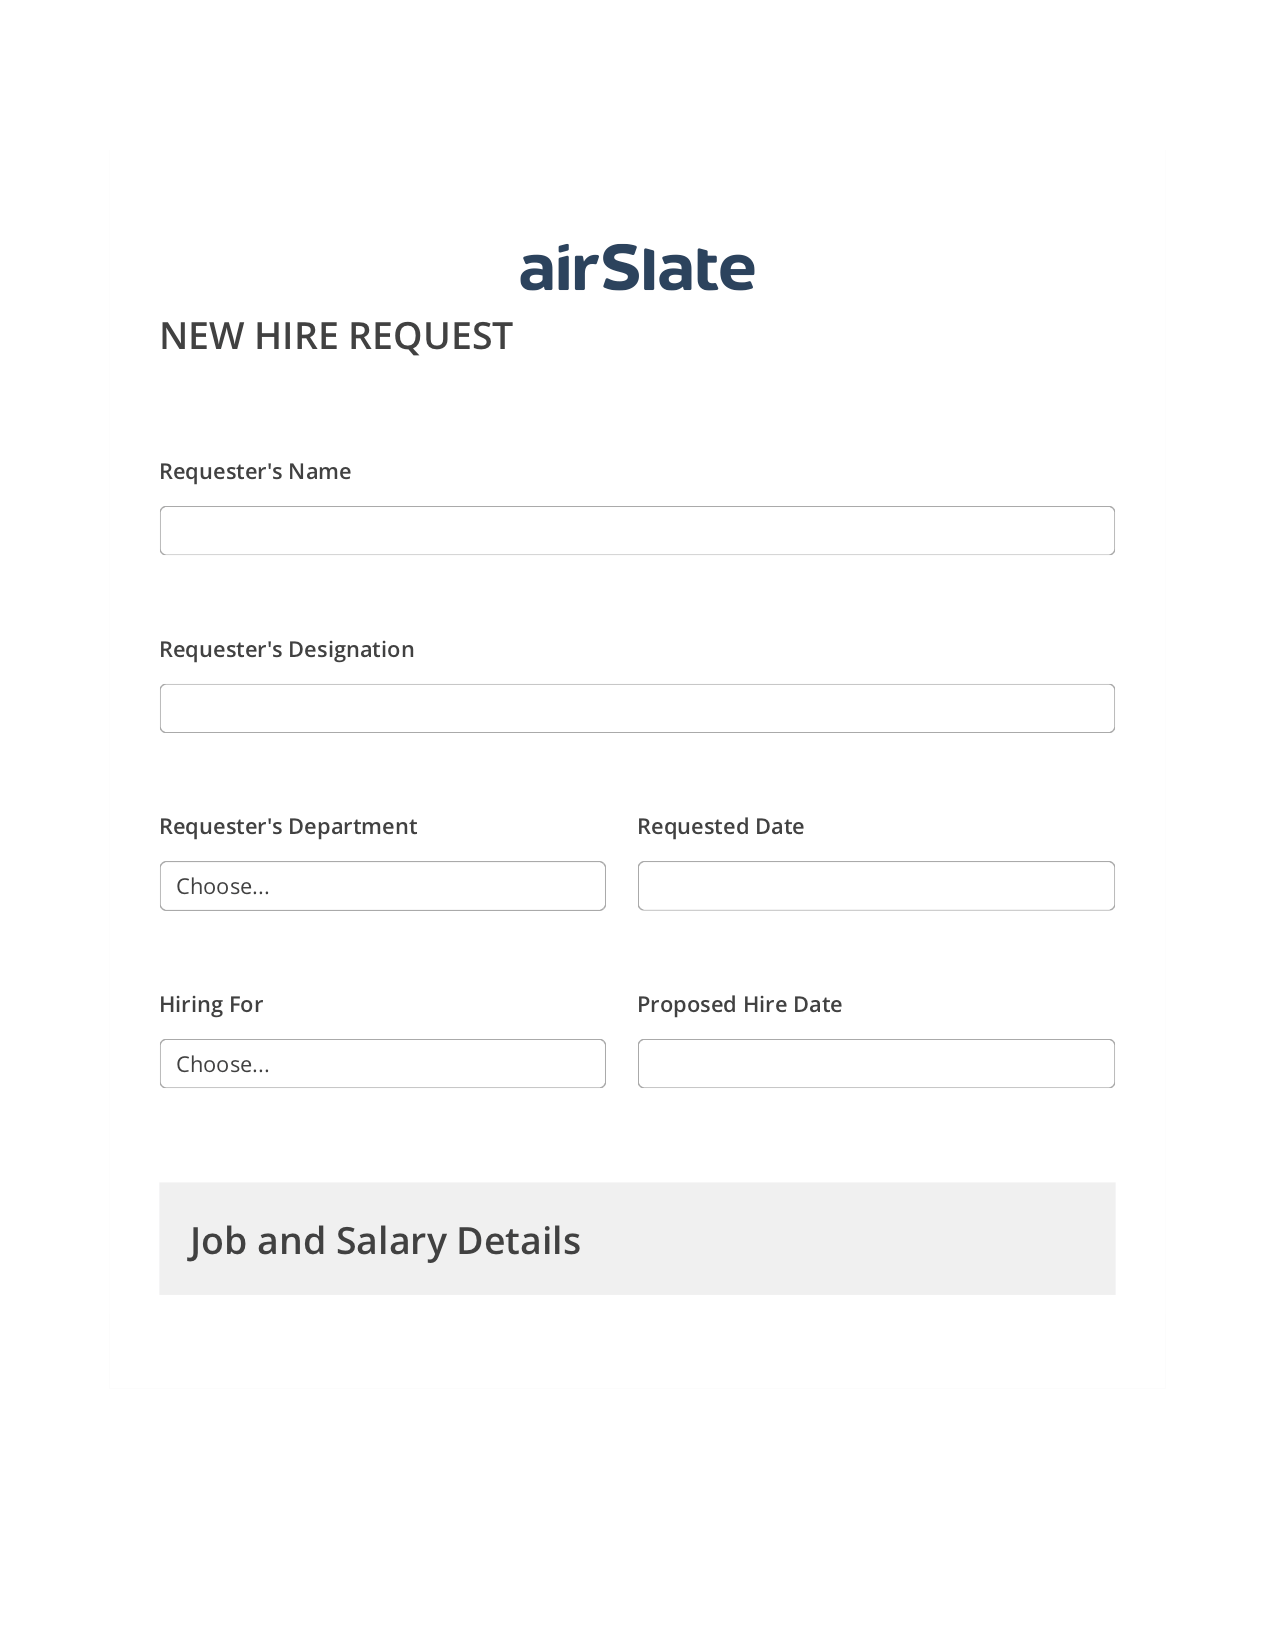 Hiring Request Workflow Pre-fill from Office 365 Excel Bot, Create NetSuite Record bot, Export to Google Sheet Bot